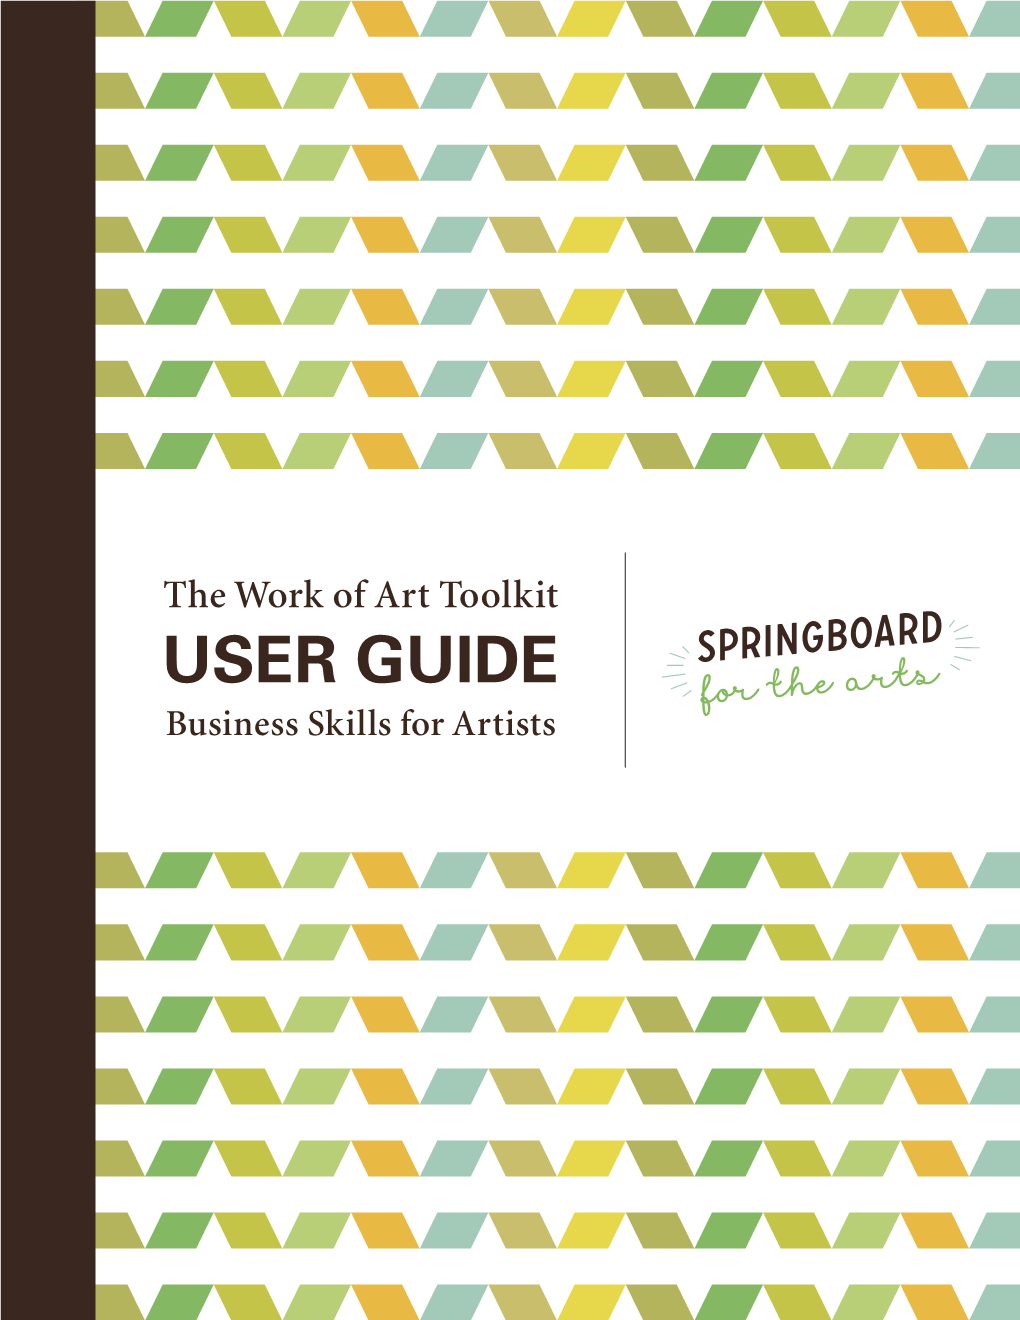 USER GUIDE Business Skills for Artists Springboard for the Arts Is an Economic and Community Development Organization for Artists and by Artists